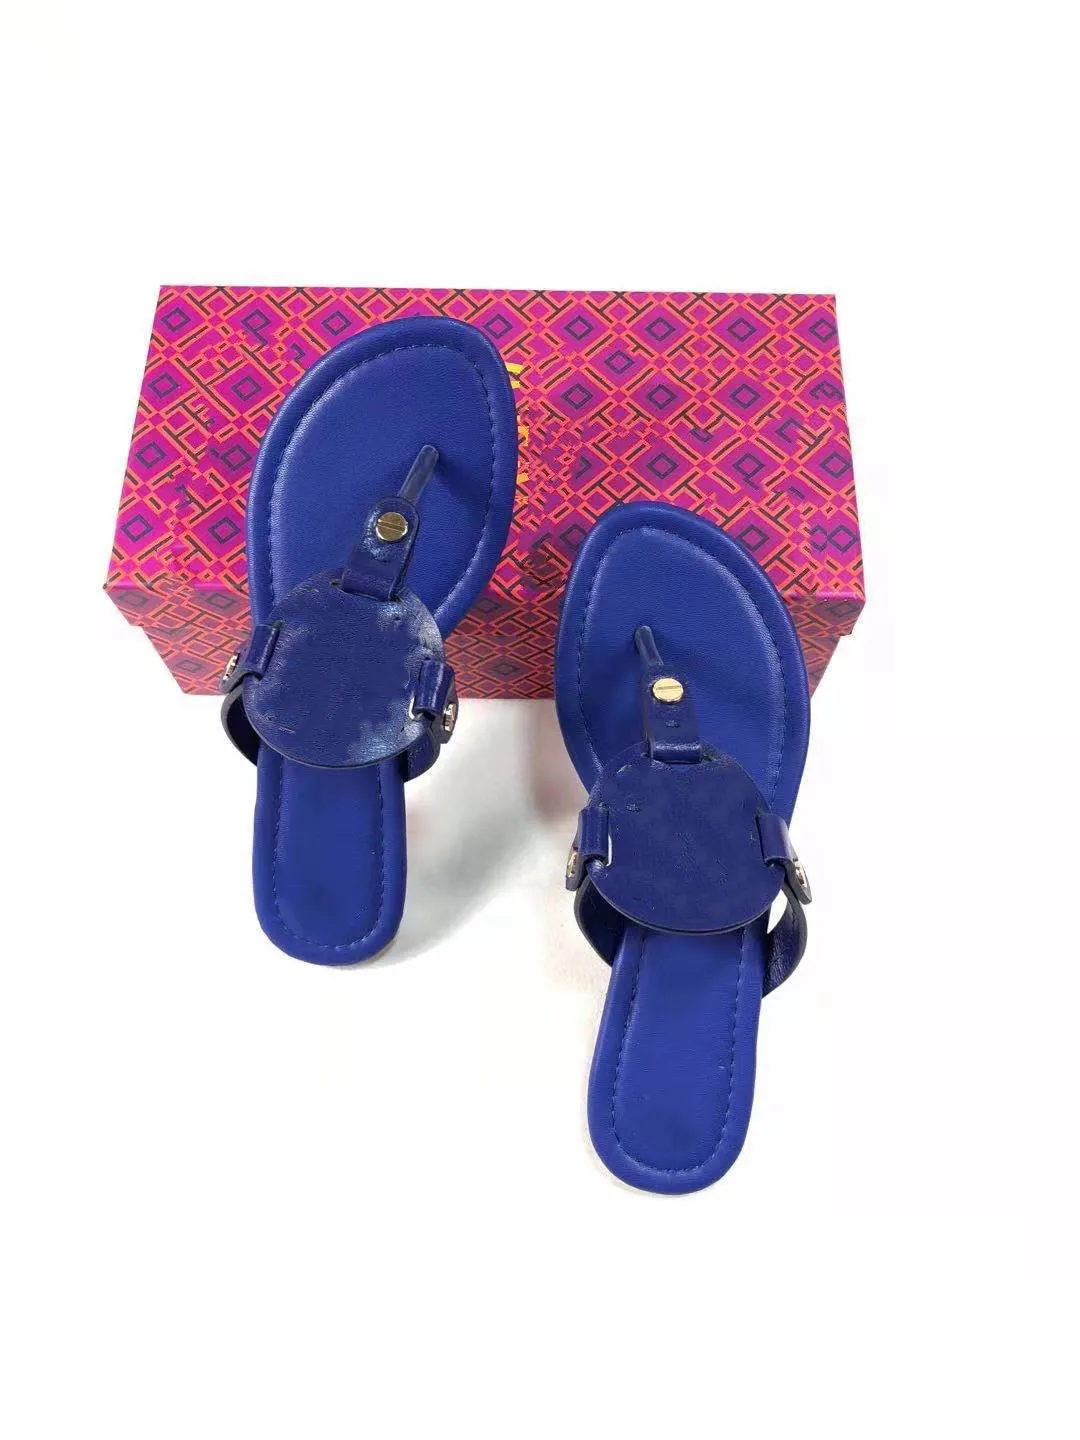 Luxury Custom Made Brand Slippers Women Wear Flat Bottomed Fashion Sandals  and Slippers out in Summer Beach Shoes Seaside Replica Slippers Flip-Flop  Slippers - China Luxury Slippers and Designer Slippers price